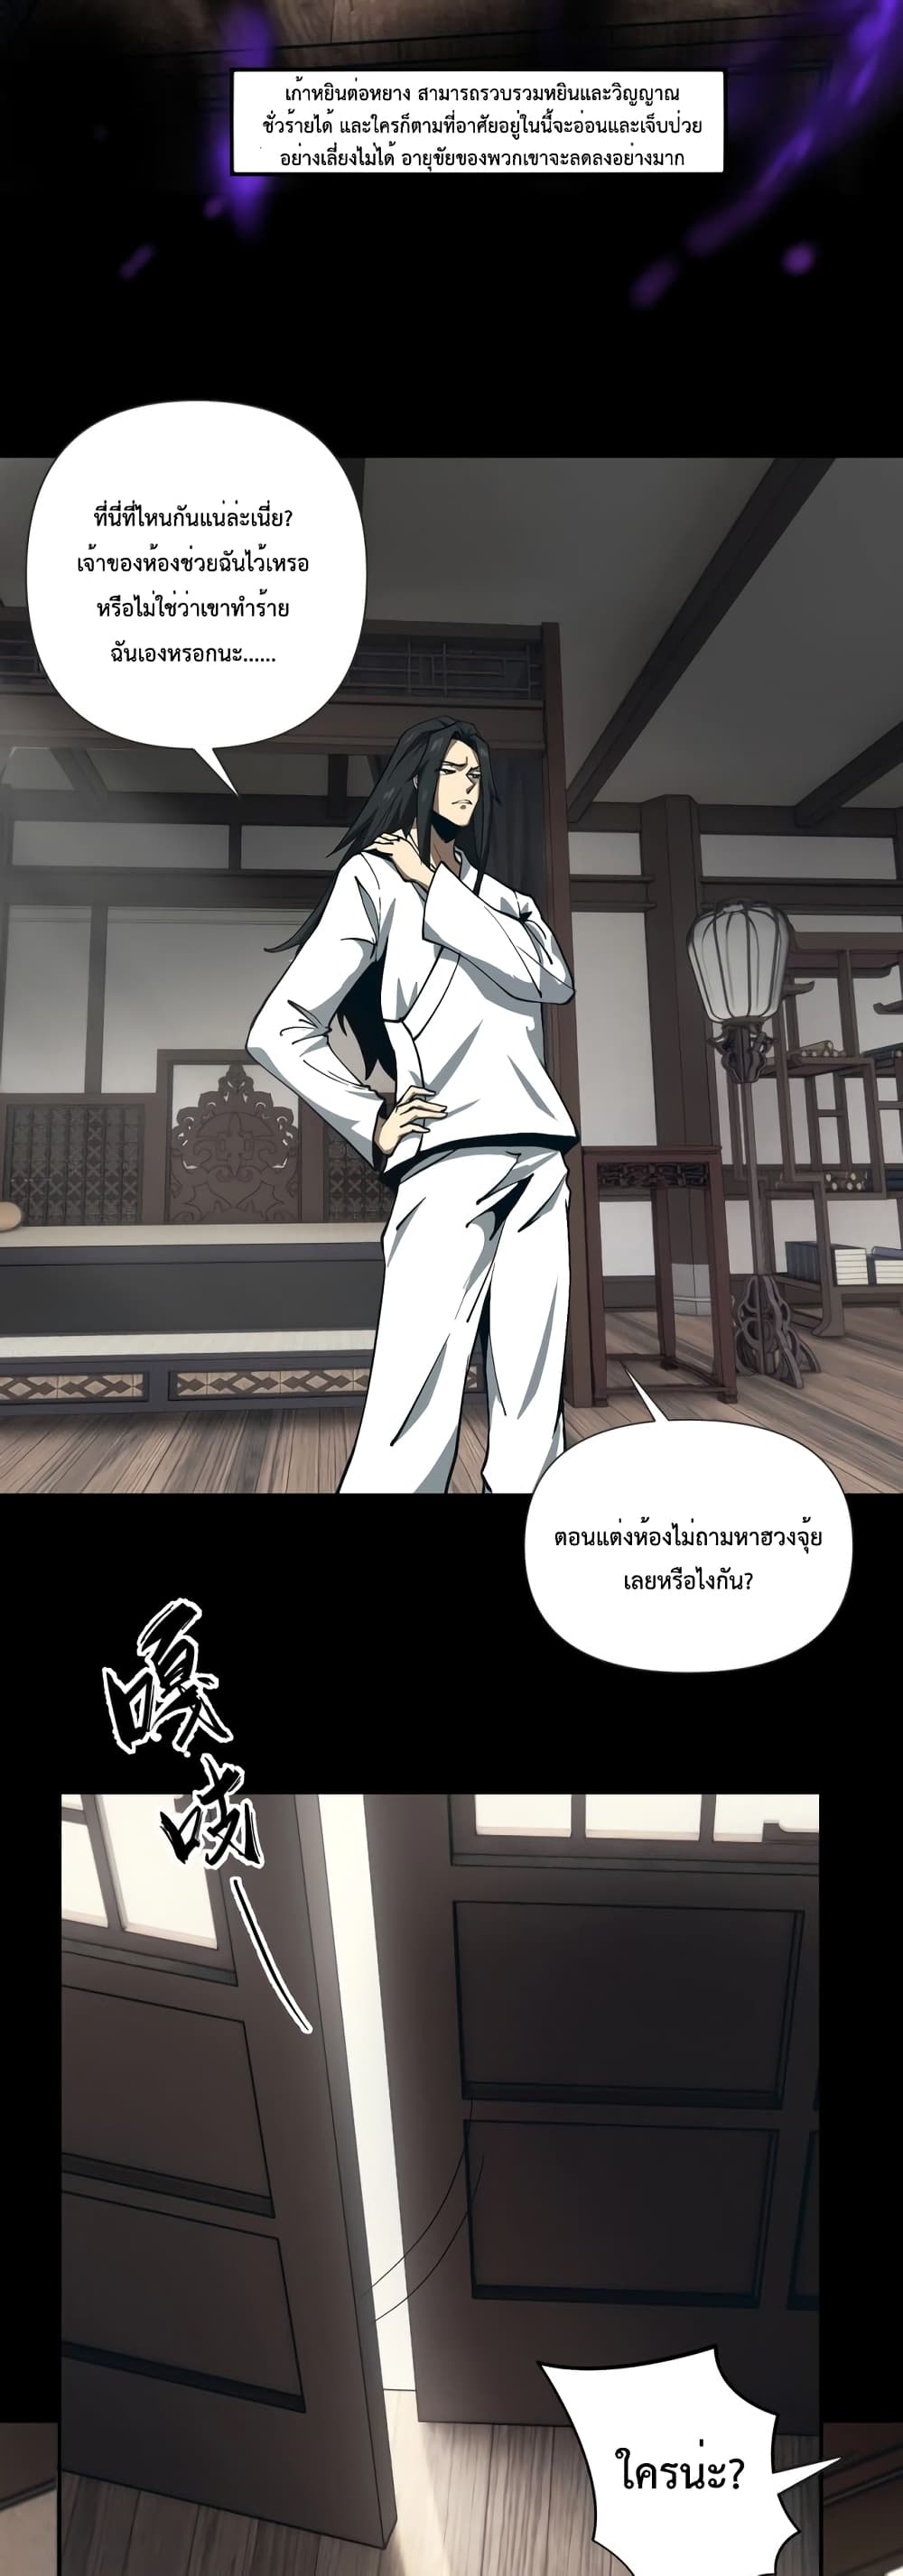 Become A God by Robbing Tombs ตอนที่ 1 (25)